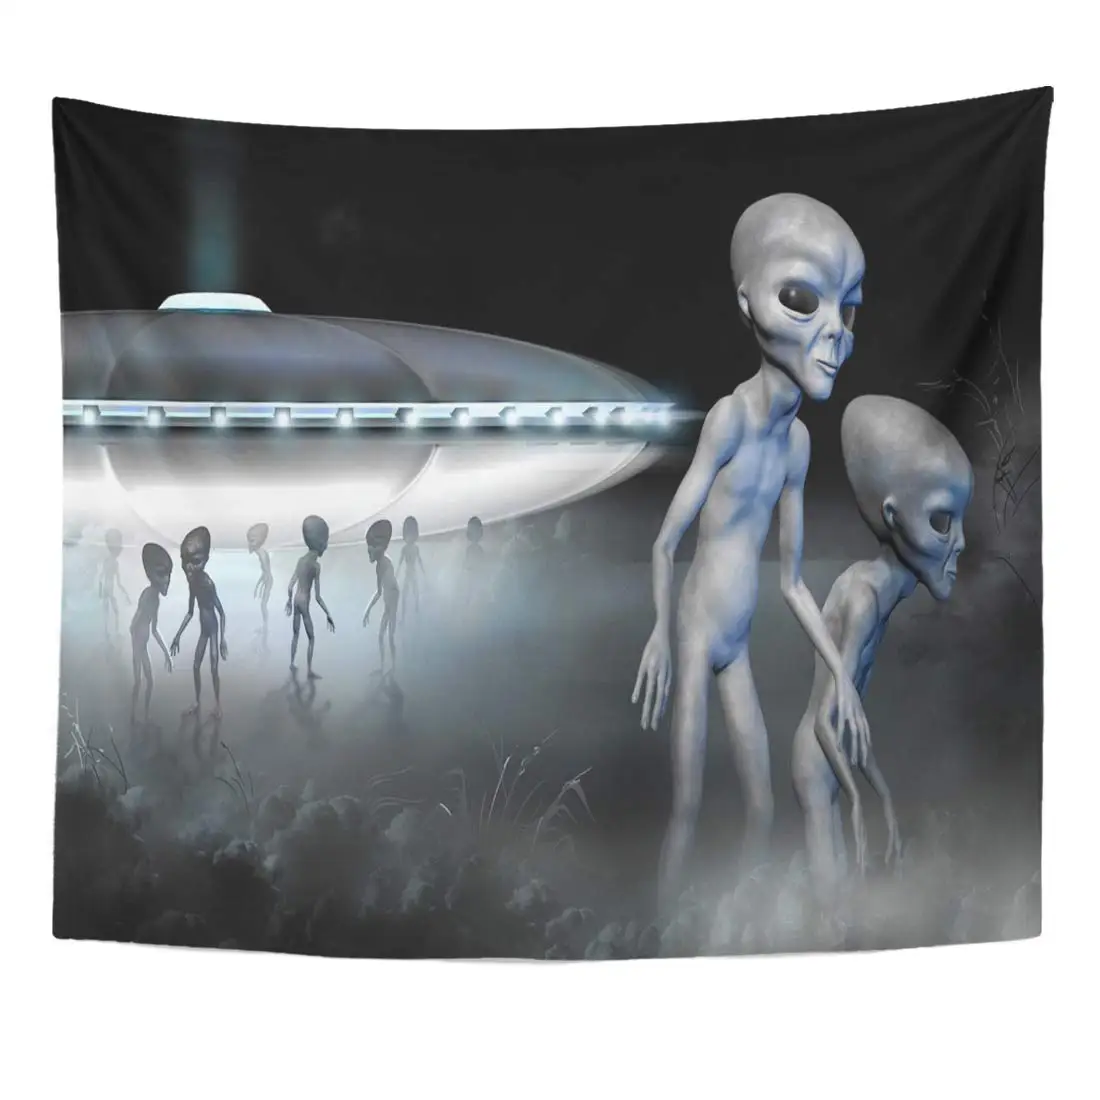 

UFO Flying Saucer and Two Grey Realistic Alien Home Decor Wall Hanging for Living Room Bedroom Dorm